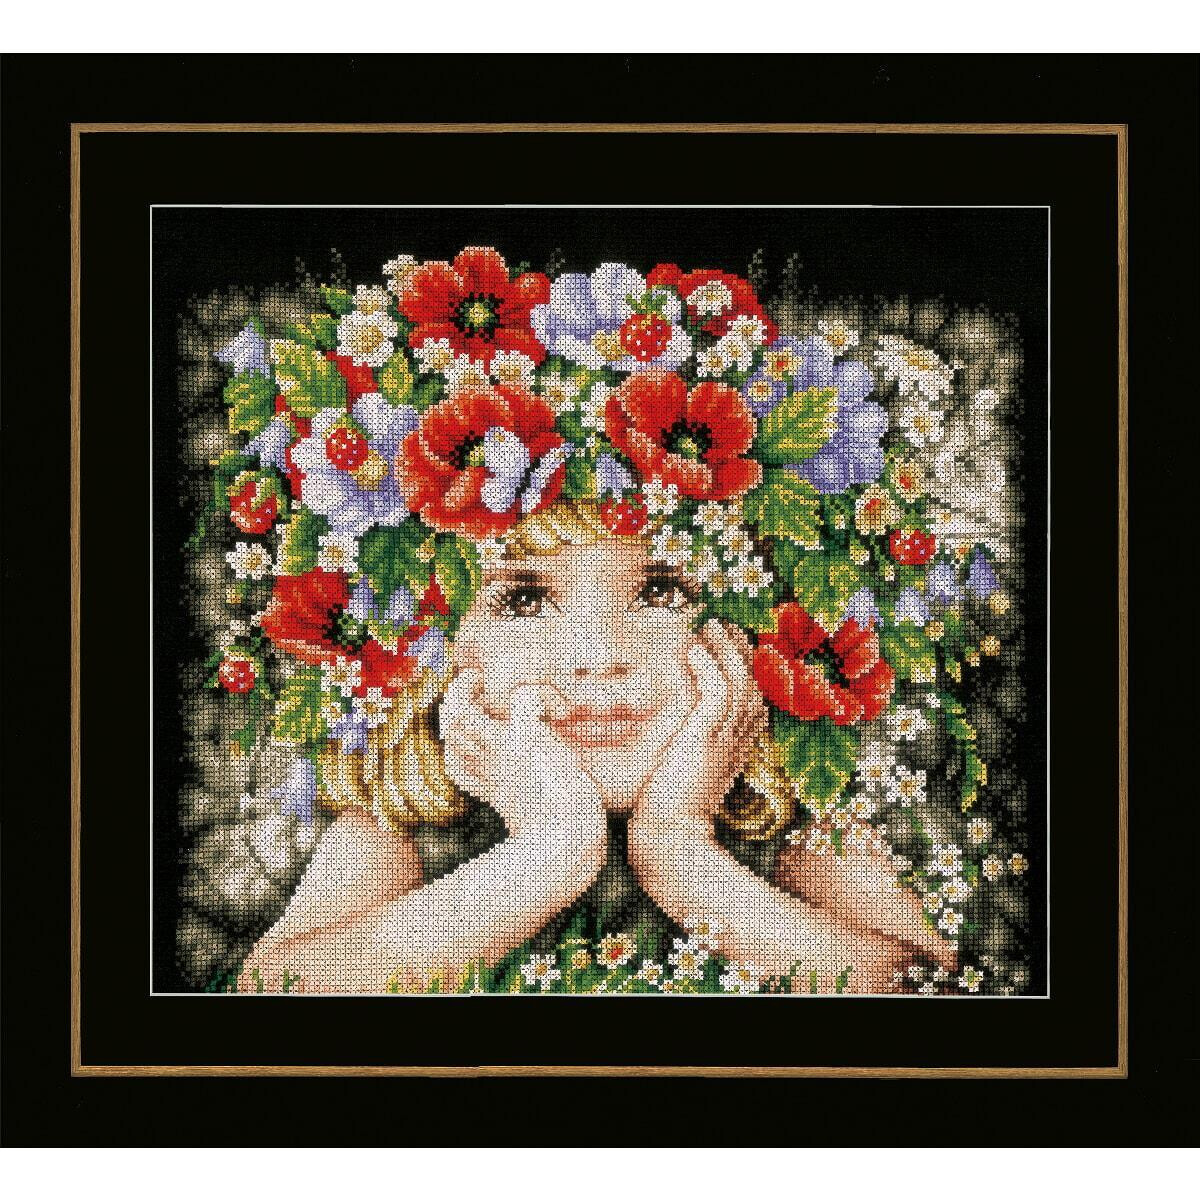 A cross stitch artwork created from a detailed embroidery...